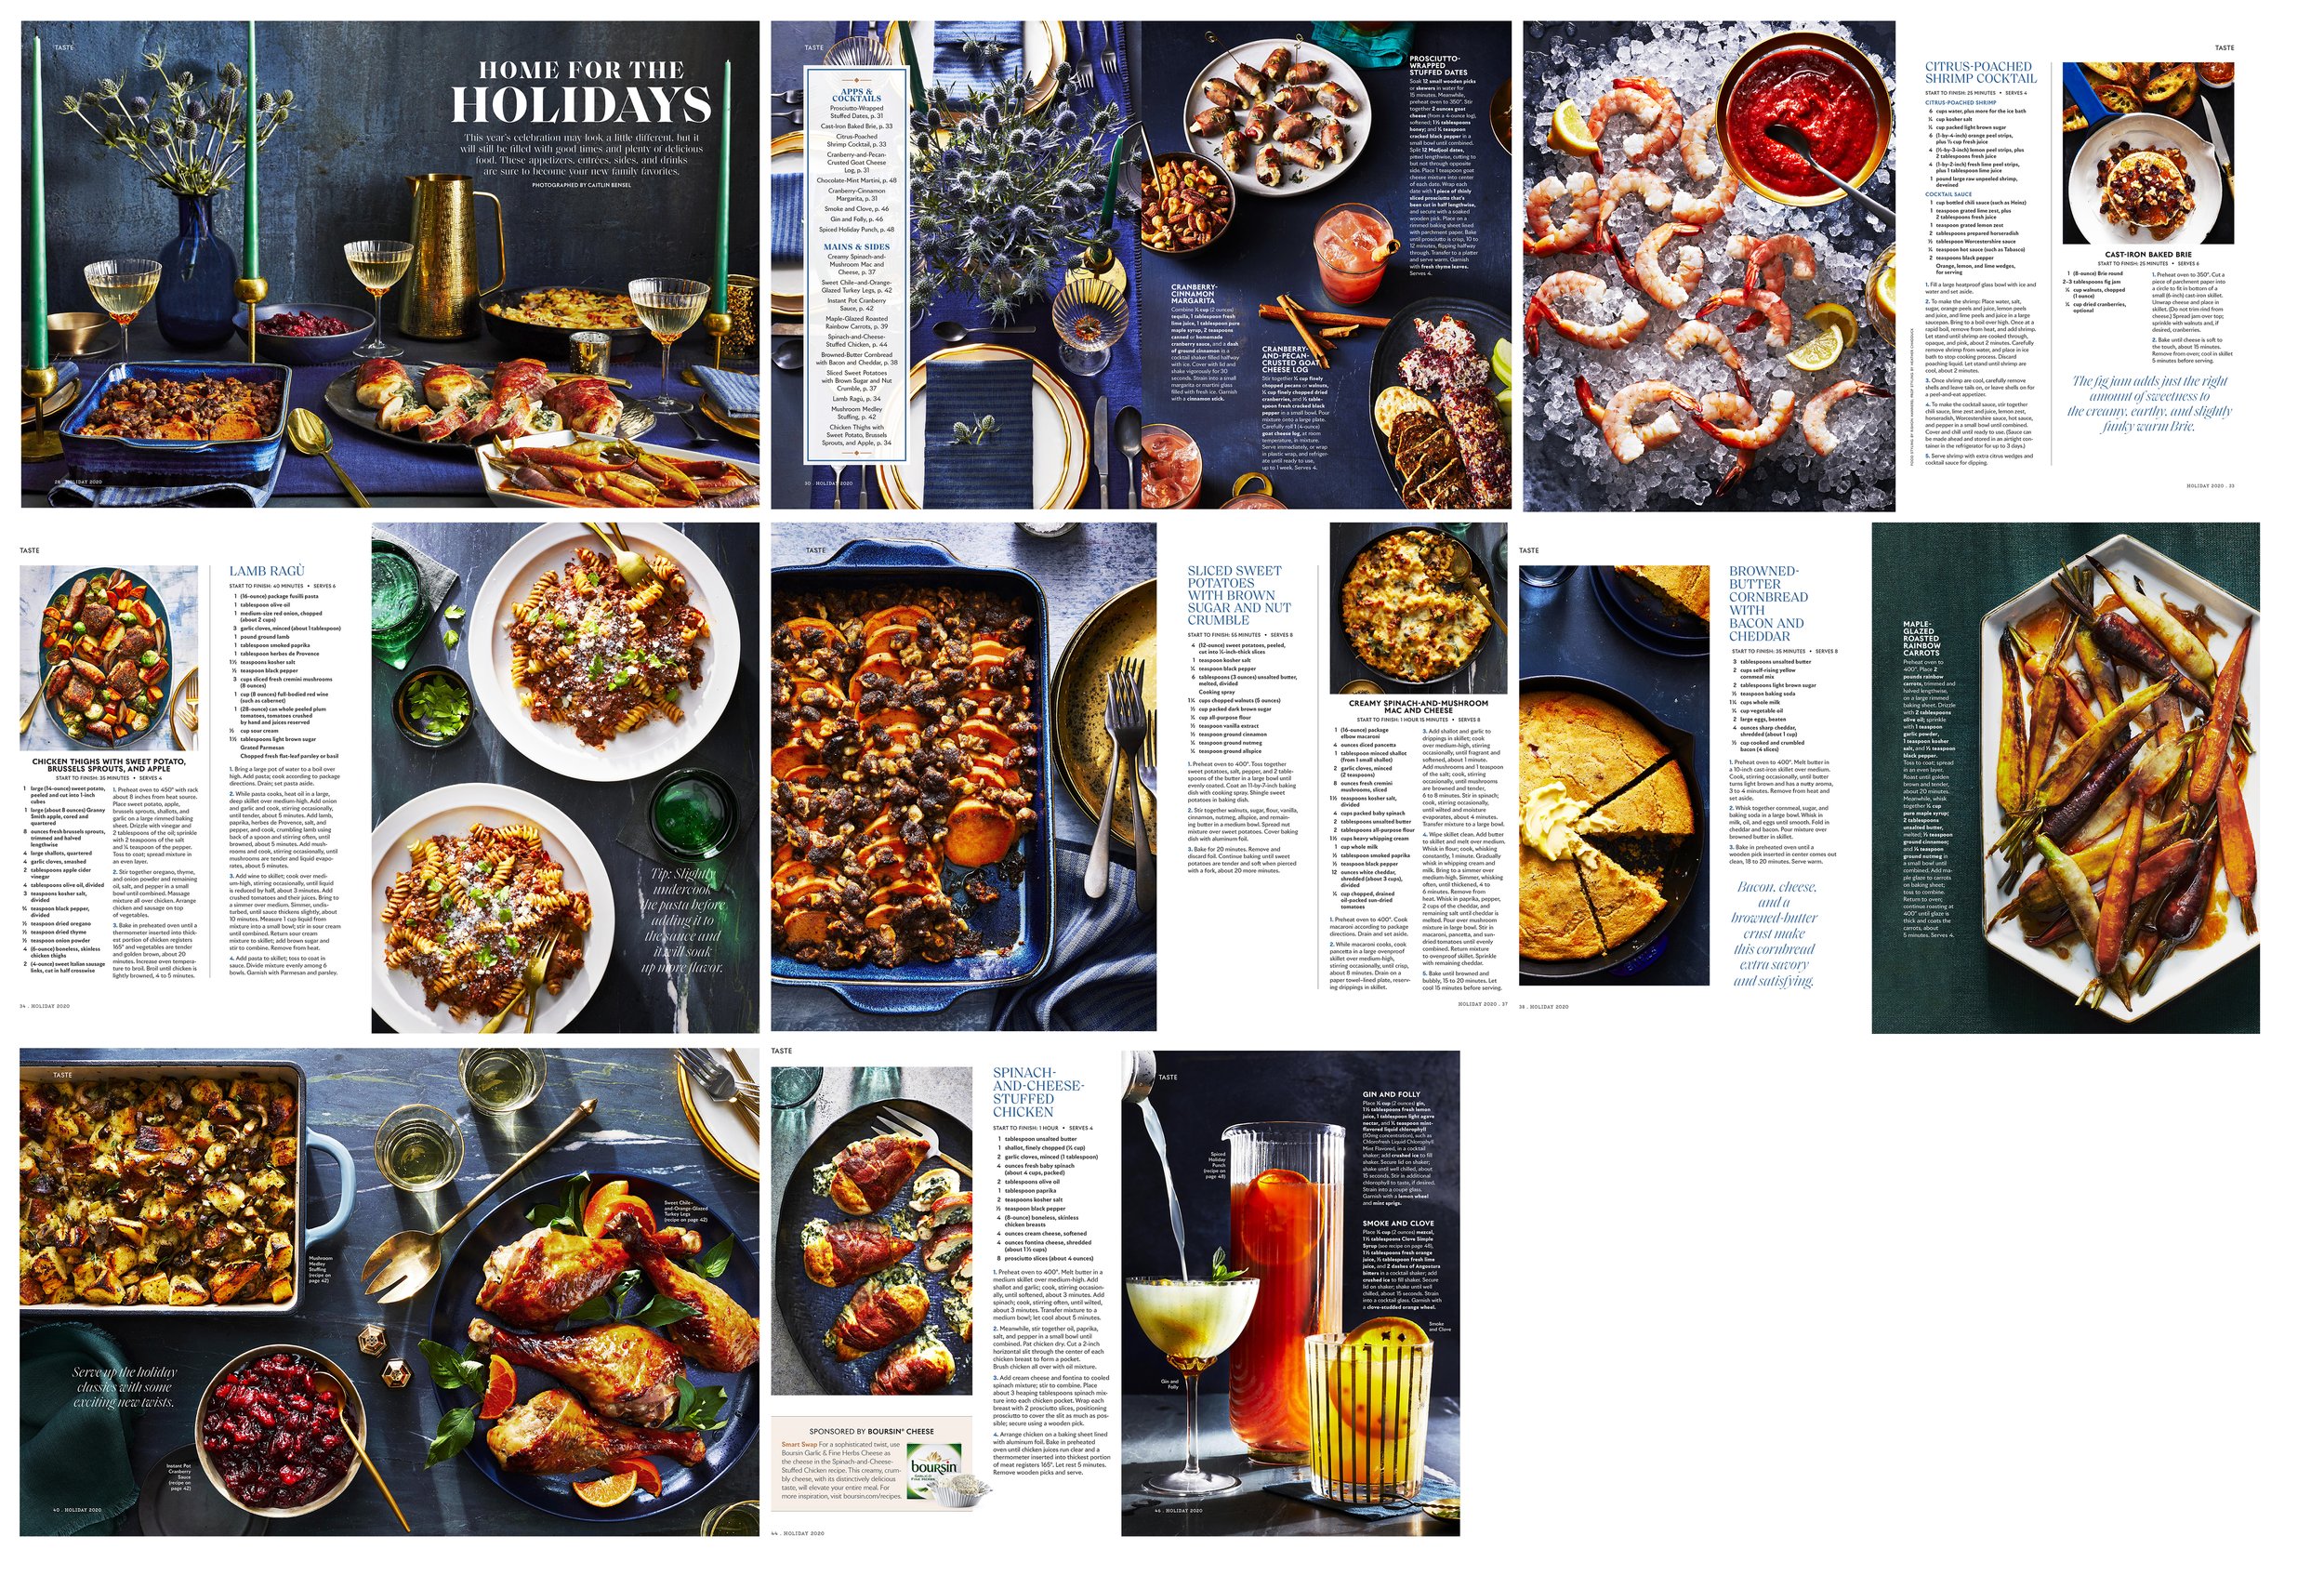 Final Photos and Layout: Food Feature- Home For The Holidays